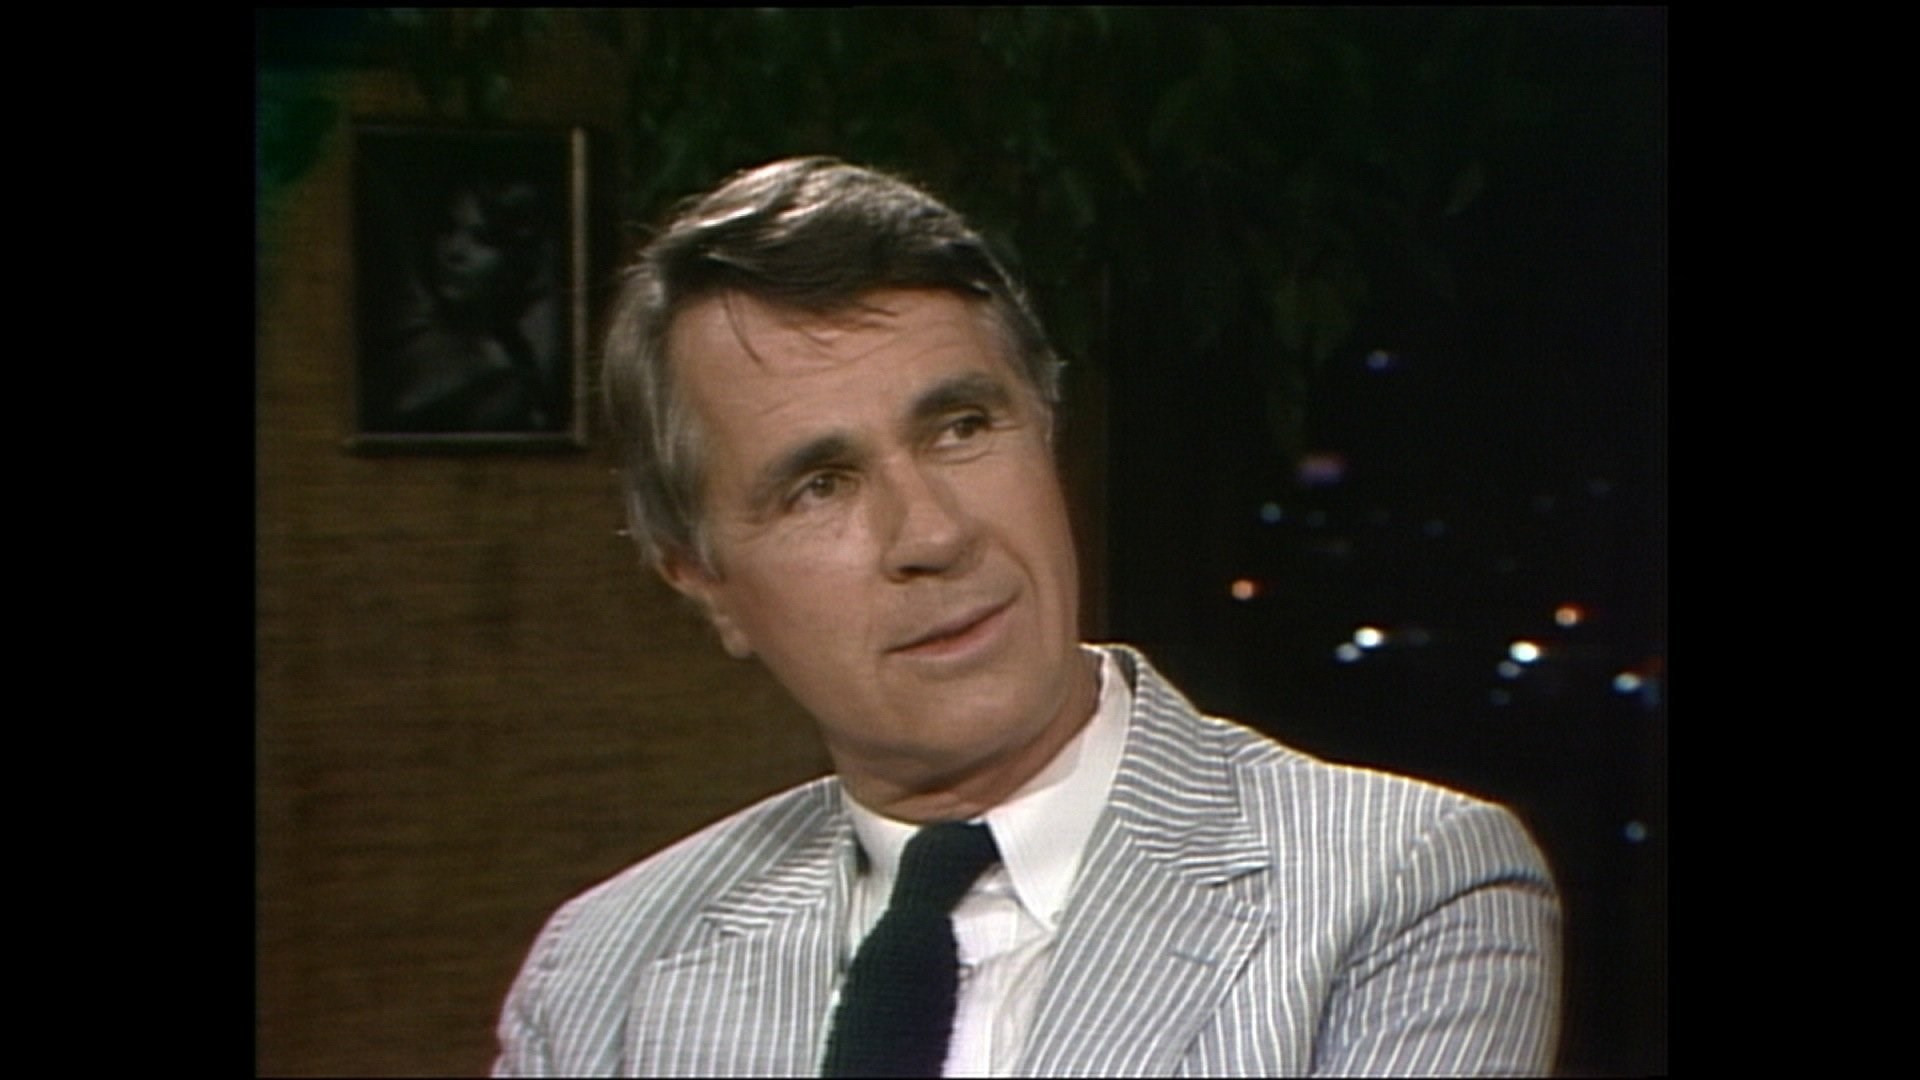 Actor James Noble, best known for playing Governor Eugene Gatling on the television show Benson, has died at the age of 94. Noble is seen here in an interview with CNN in 1981.